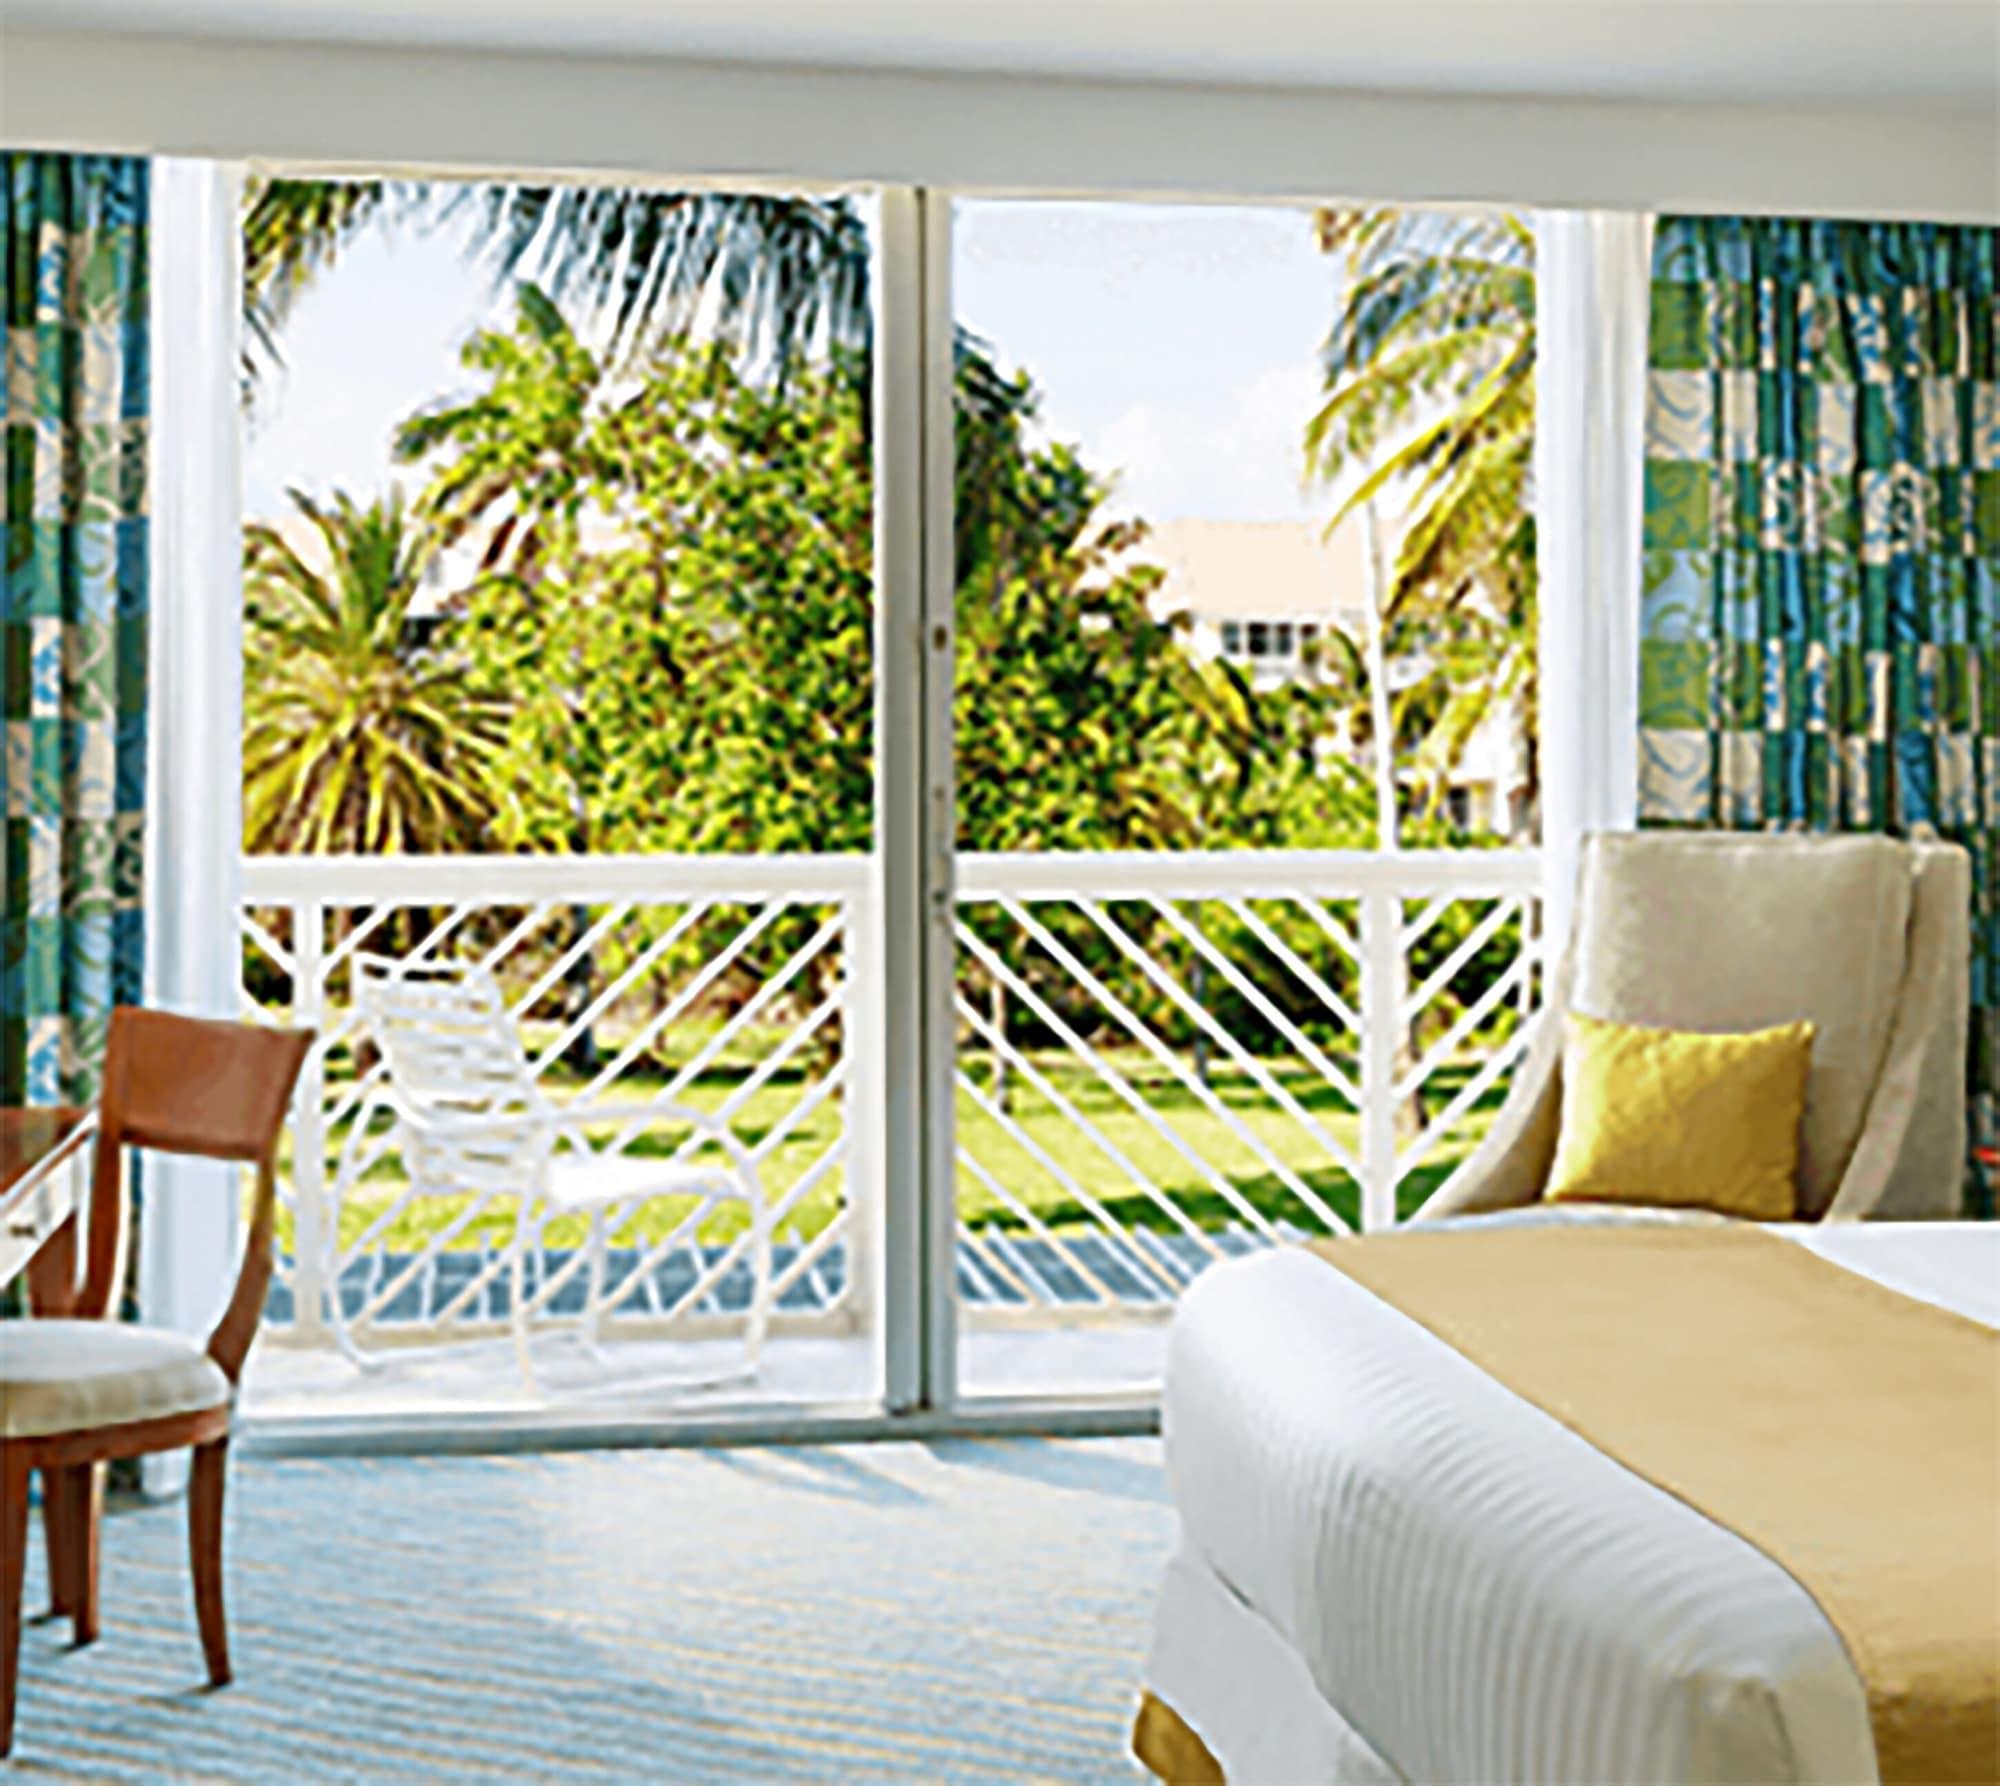 Lighthouse Pointe At Grand Lucayan Resort Фрипорт-Сити Экстерьер фото